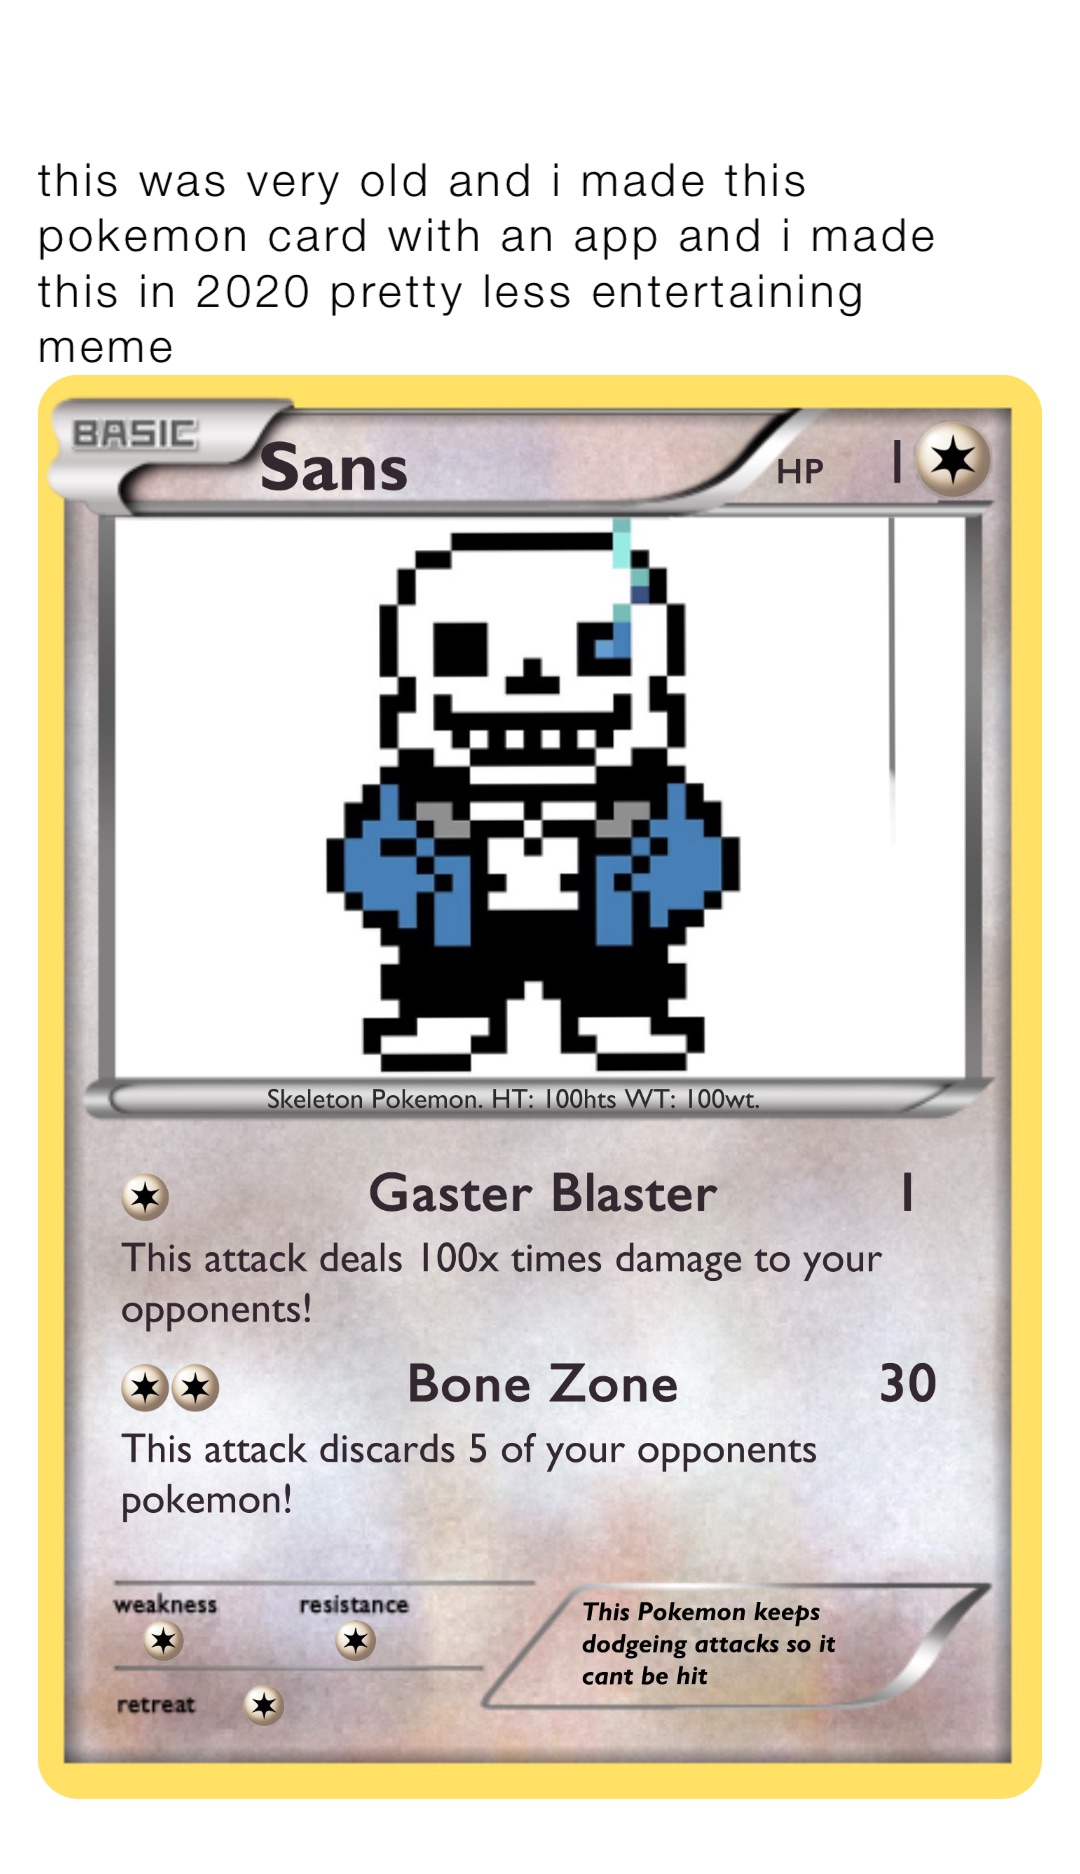 this was very old and i made this pokemon card with an app and i made this in 2020 pretty less entertaining meme